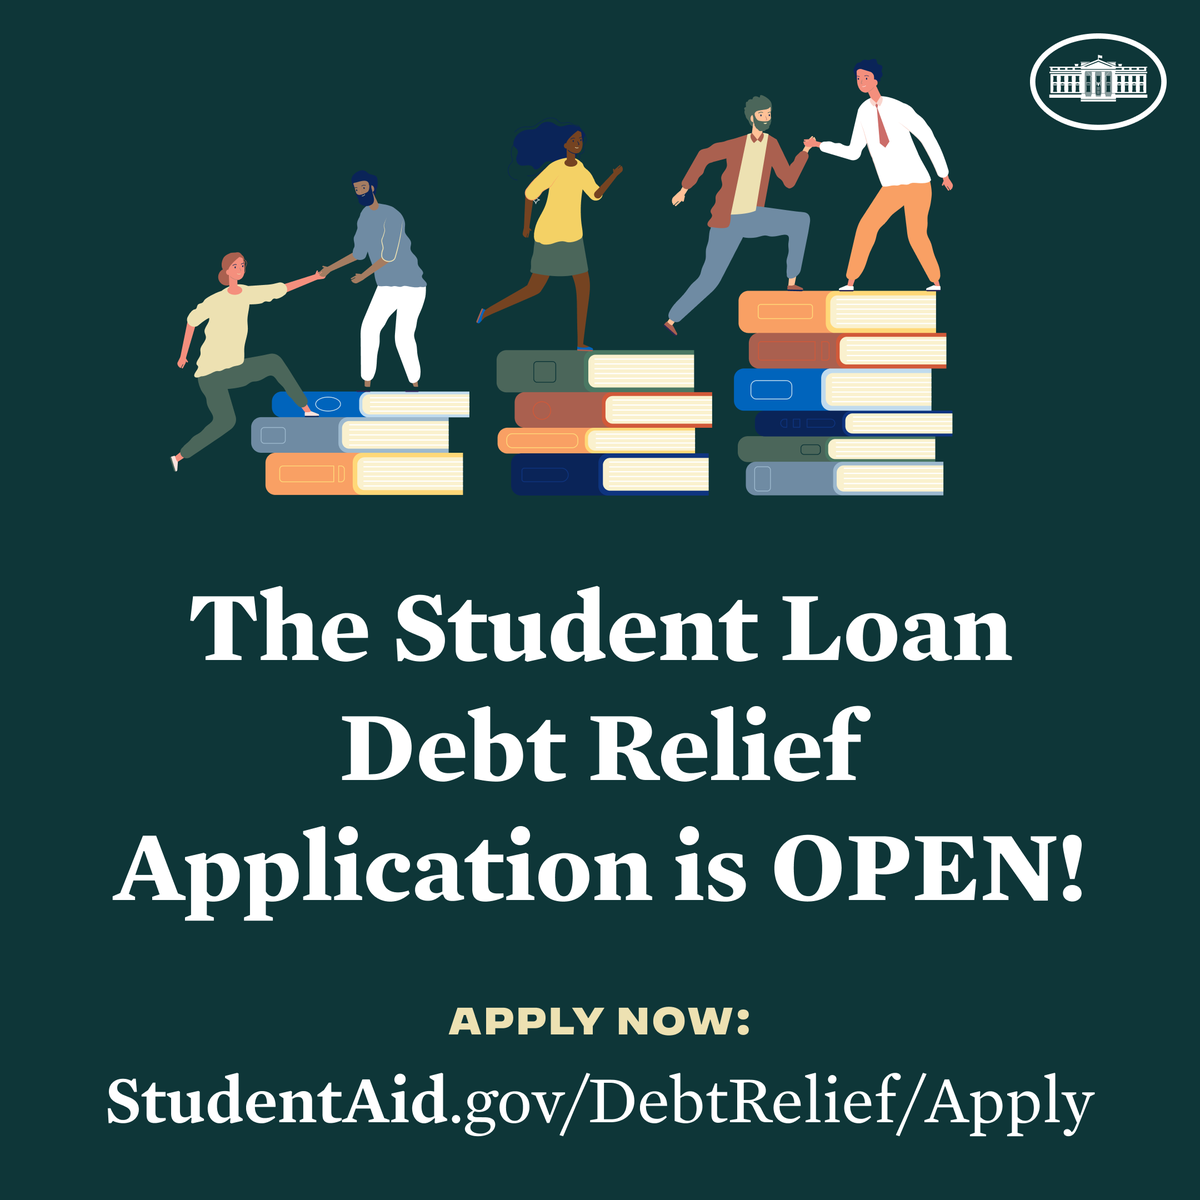 The Student Loan Debt Relief application is open now through December 31, 2023. Apply today: studentaid.gov/debtrelief/app…